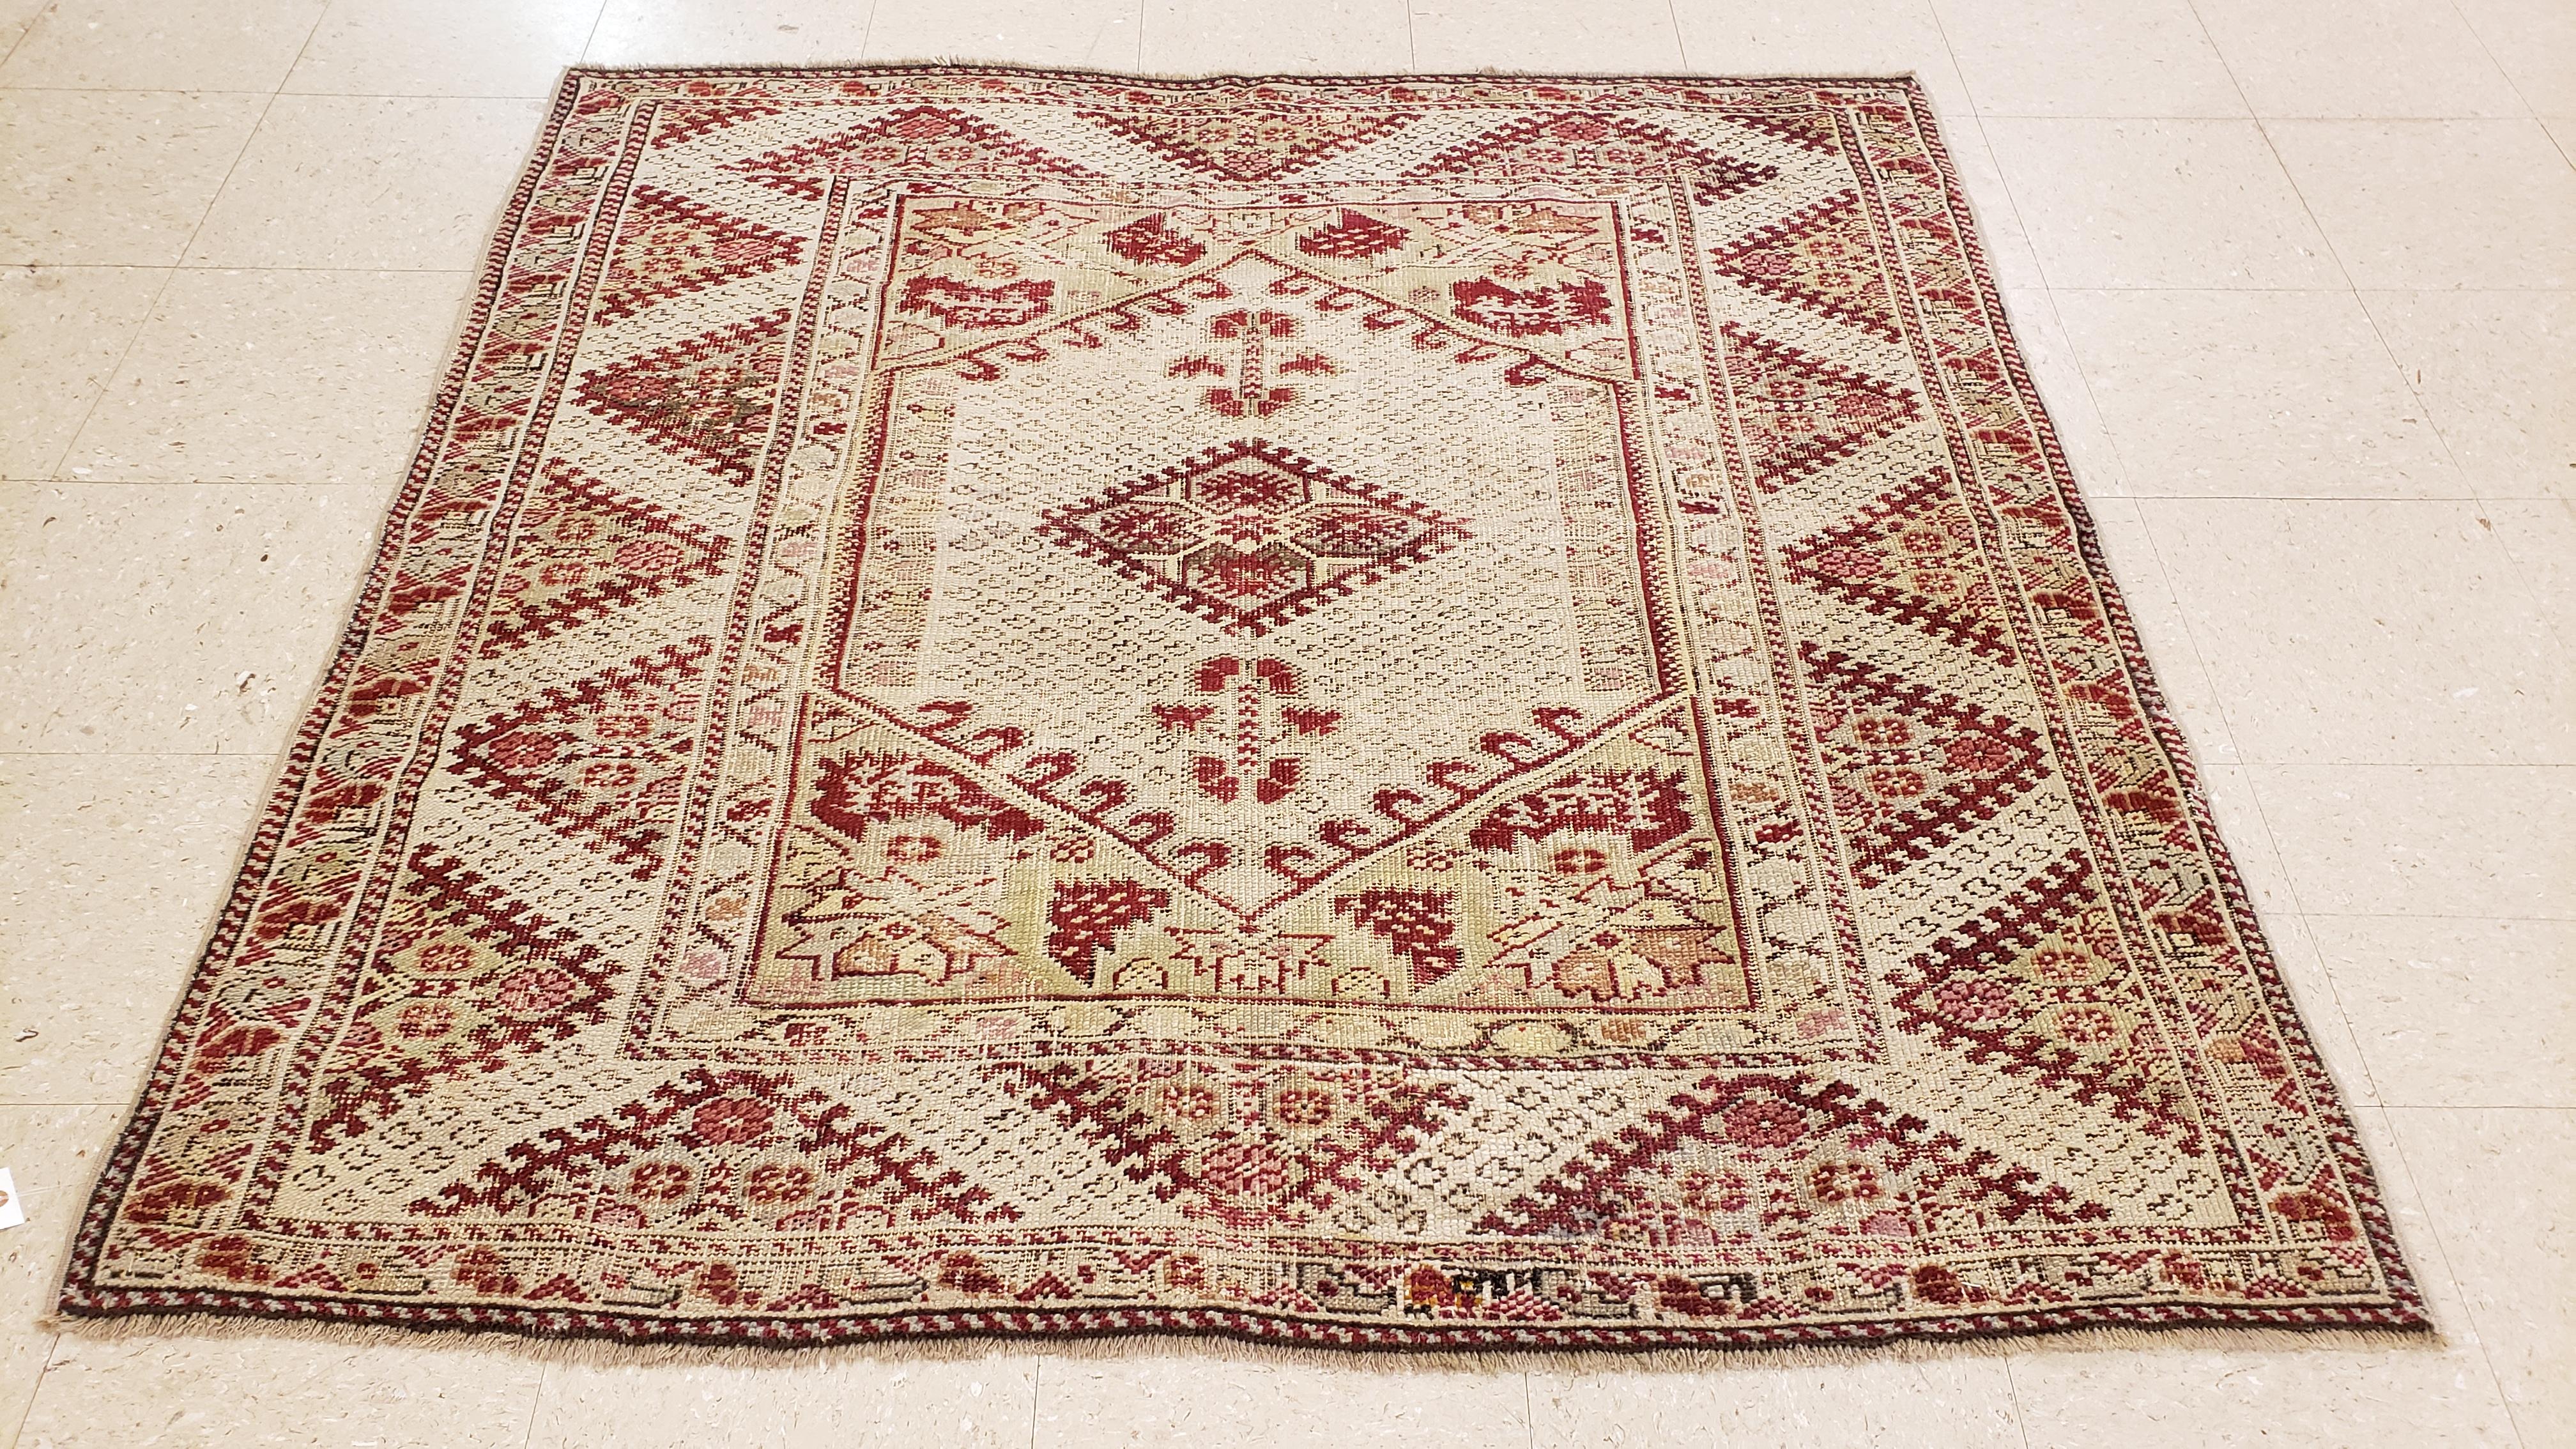 Antique Ghiordes Rug, Handmade Turkish Oriental Rug, Beige, Taupe In Good Condition For Sale In Port Washington, NY